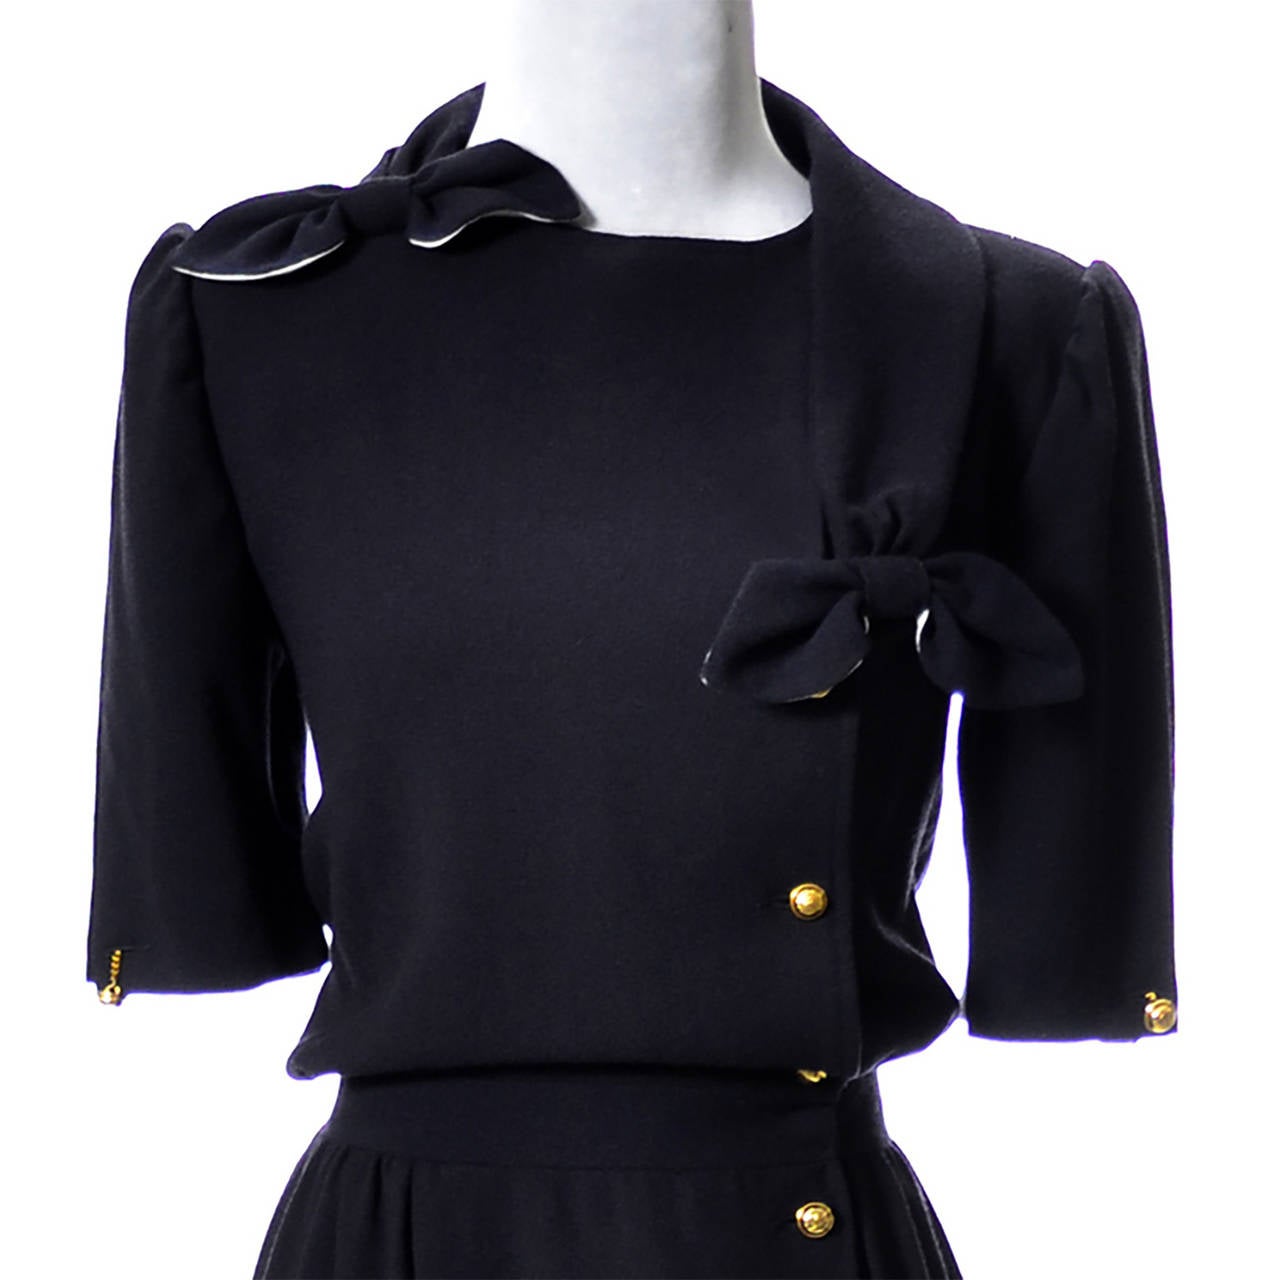 This mint condition Valentino boutique navy blue wool crepe designer vintage dress was made in Italy in the early 1980's.  This dress is in incredible condition and comes from an outstanding estate I acquired that had absolutely beautiful designer